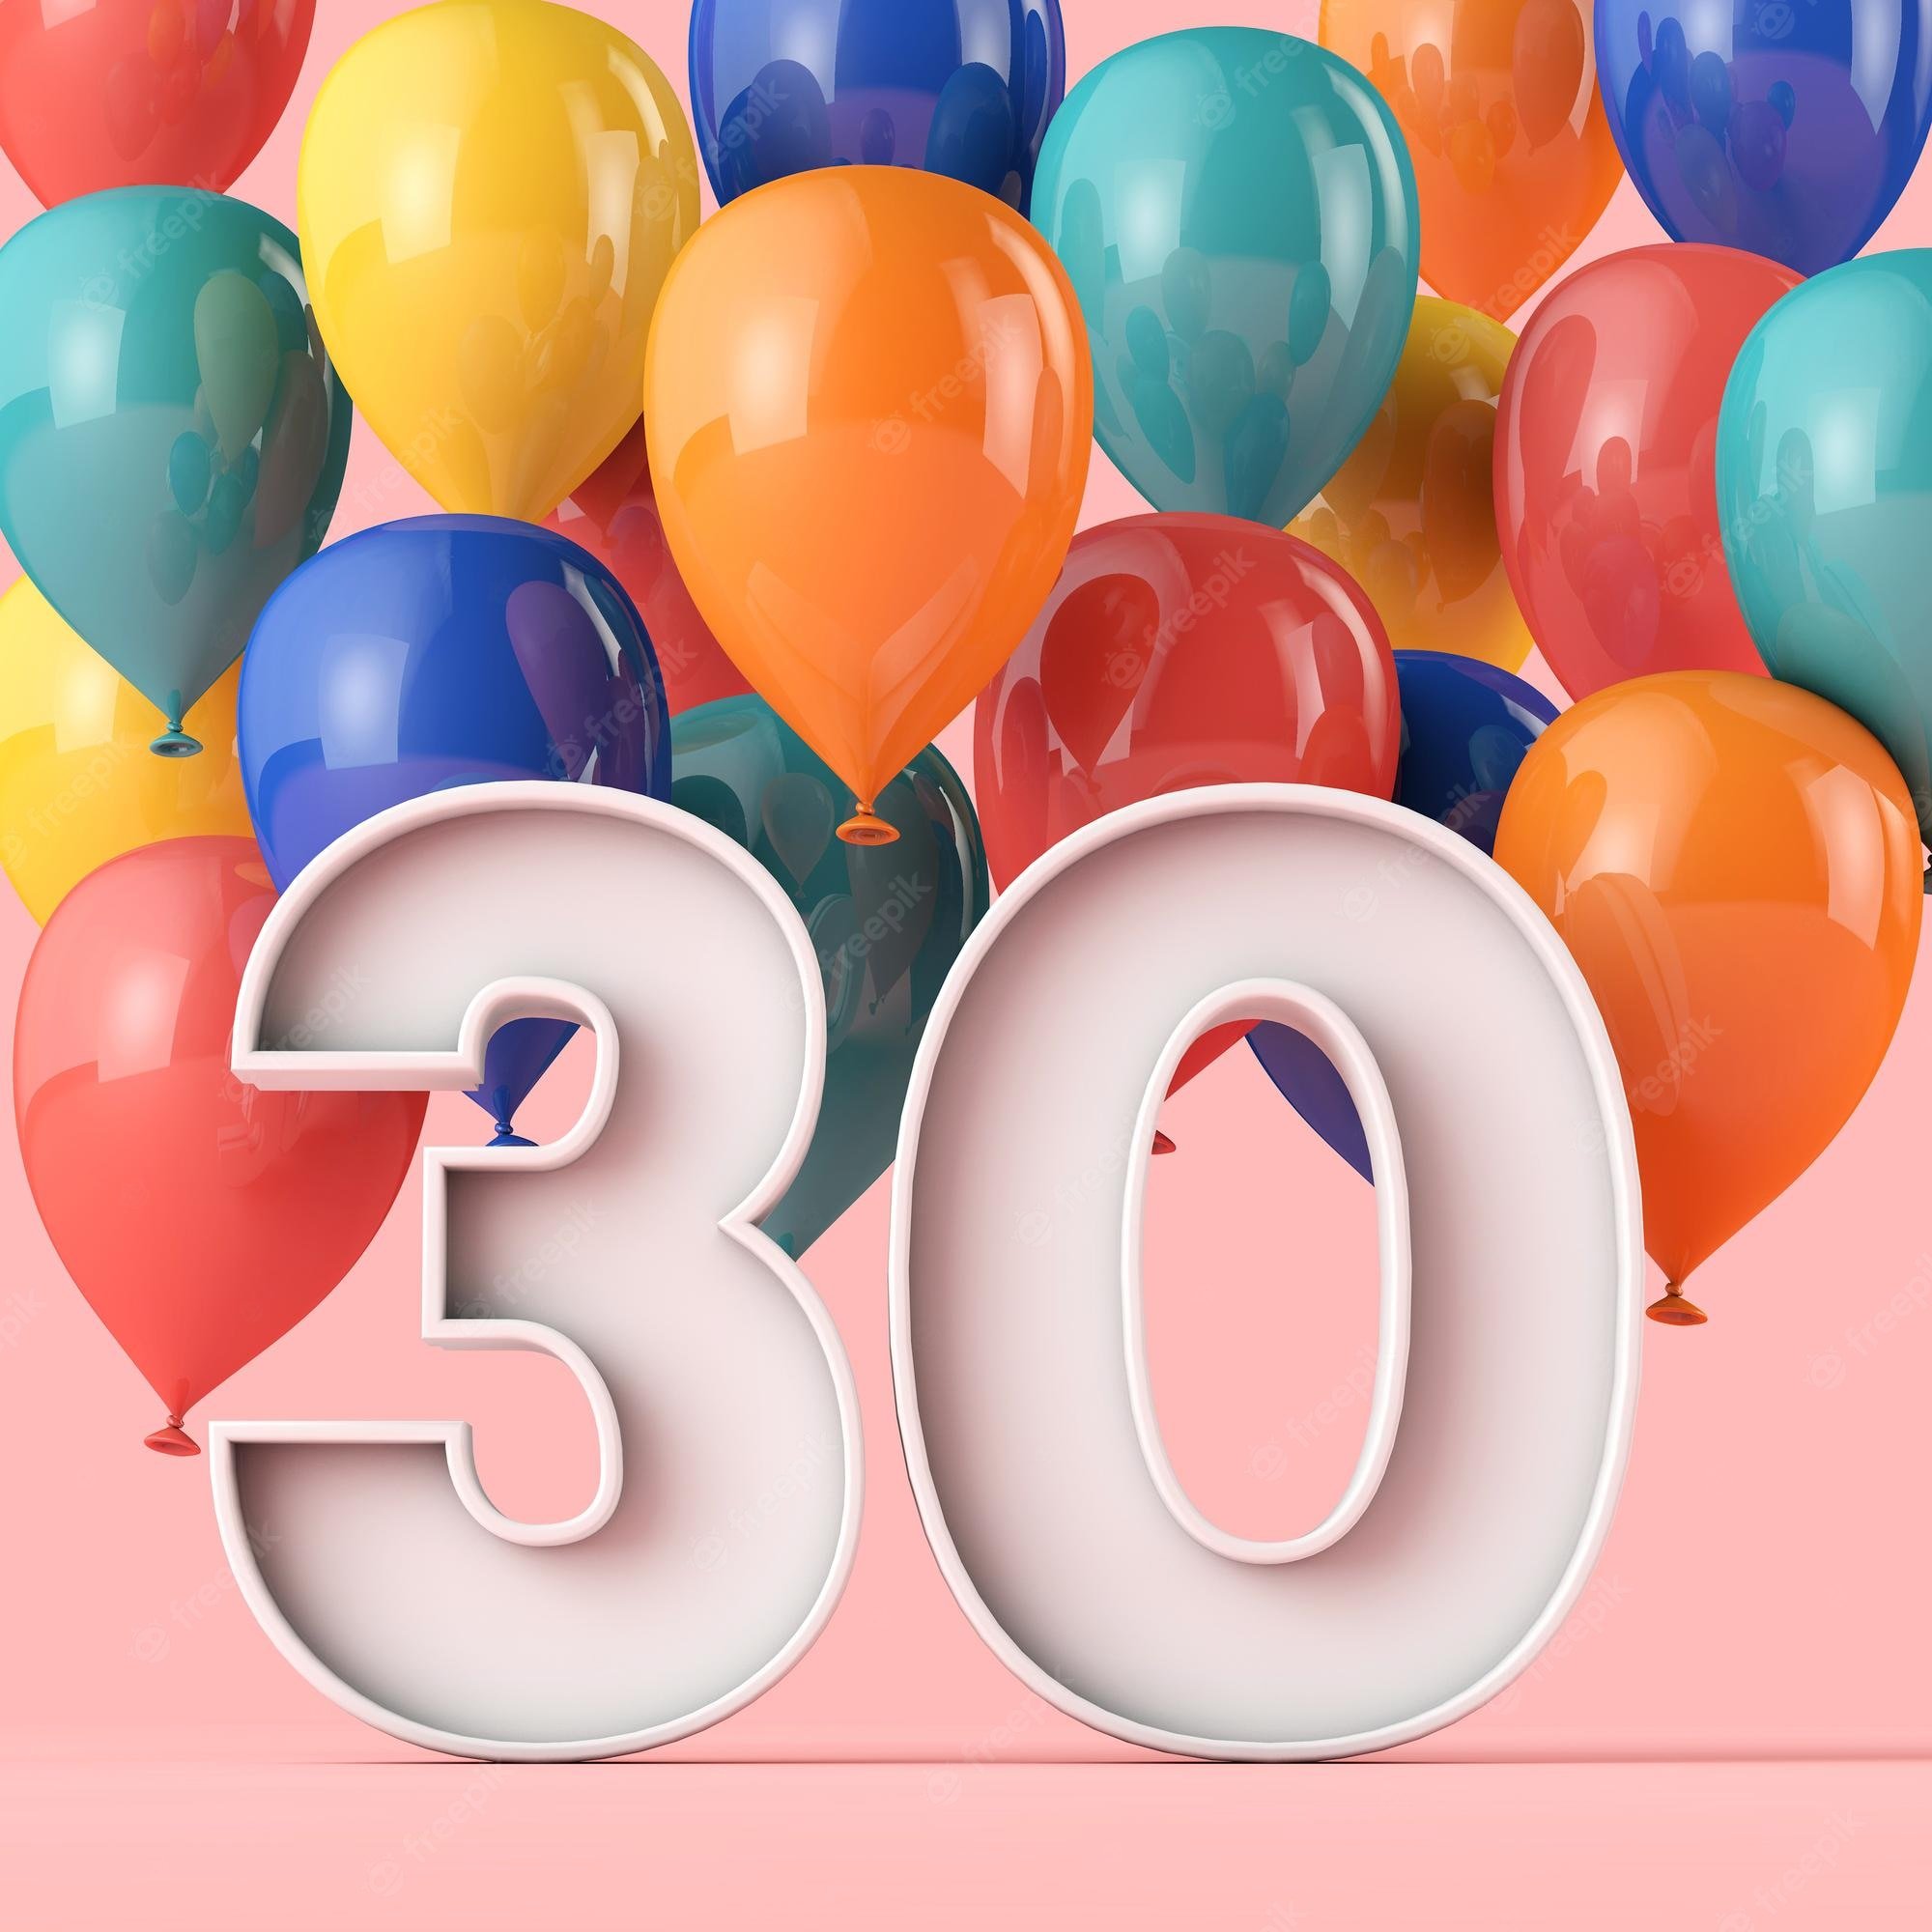 Premium Photo. Happy 30th birthday background with colourful balloons 3D rendering